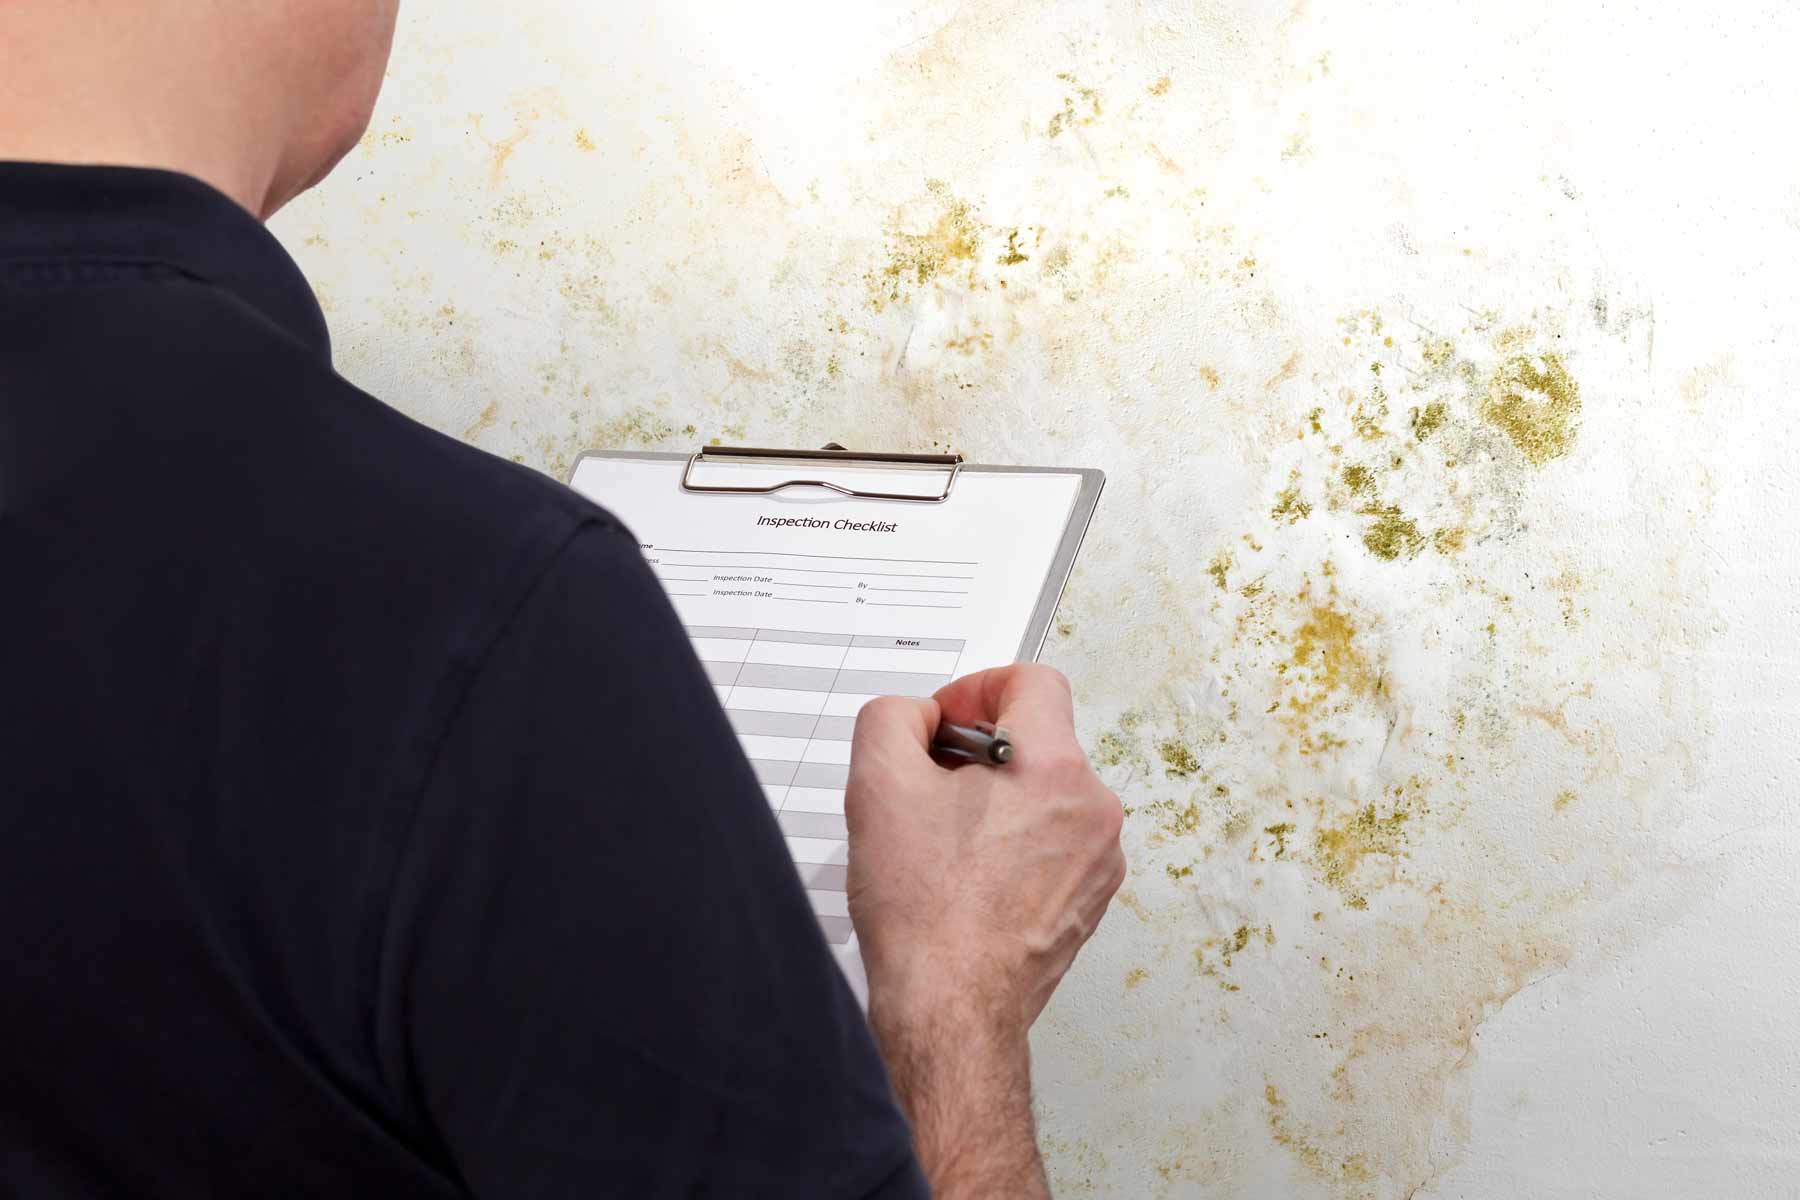 Who Pays For Mold Inspection: Buyer Or Seller?